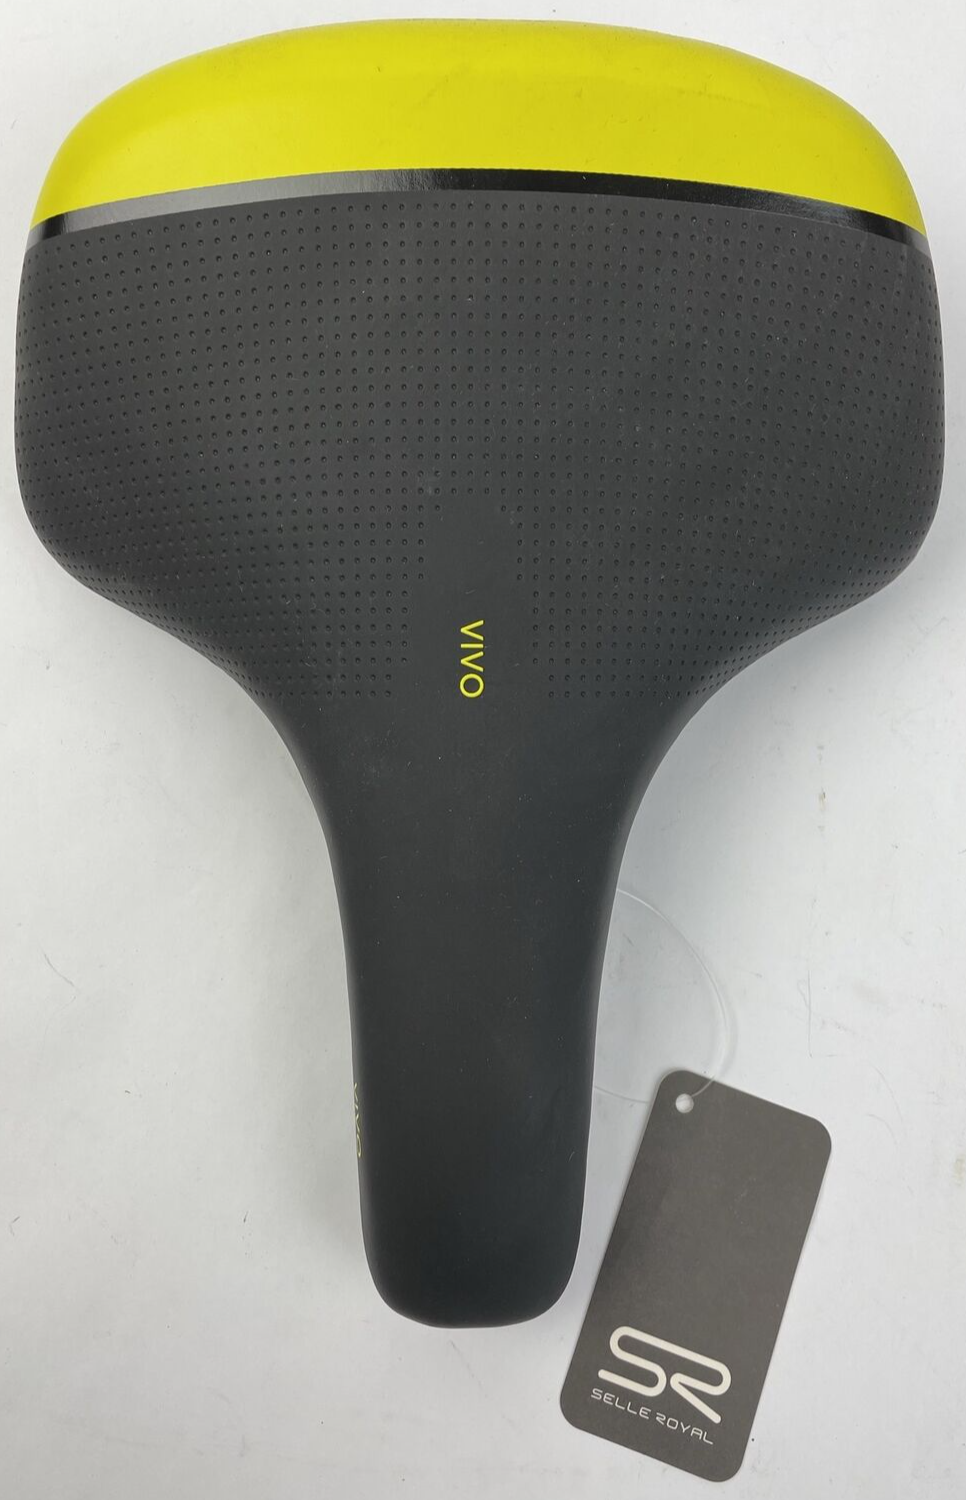 NWT Selle Royal VIVO  Bicycle Saddle Black w Yellow Accents Model 1504URN LOOK - $33.65